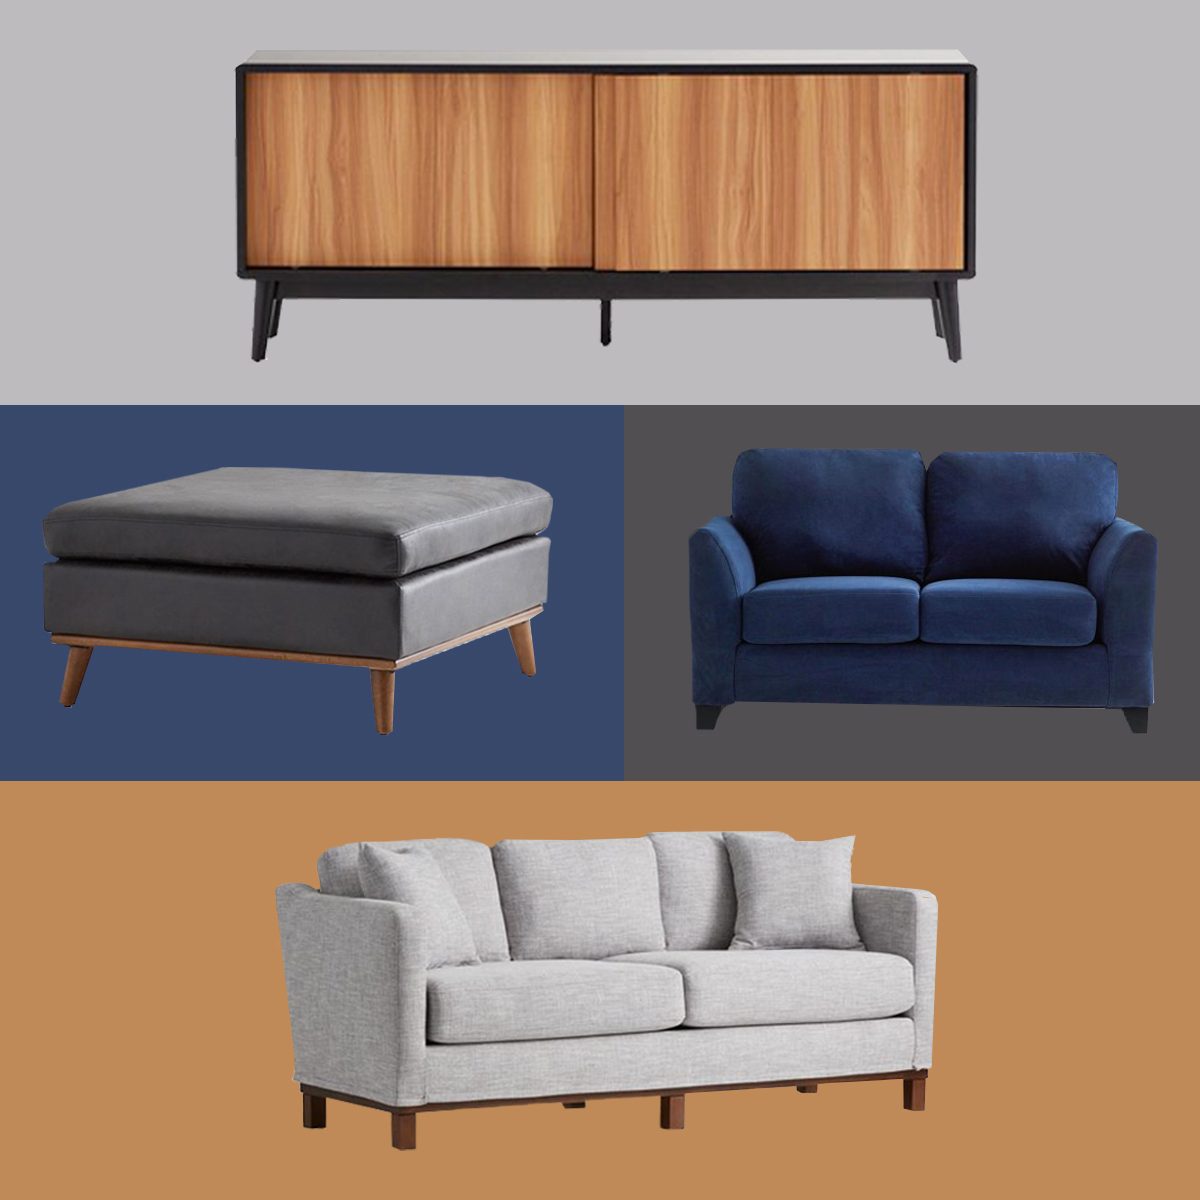 https://www.rd.com/wp-content/uploads/2021/11/Walmart-and-Gap-Just-Collaborated-on-an-Affordable-Furniture-Line%E2%80%94Here%E2%80%99s-What-To-Shop-.jpg